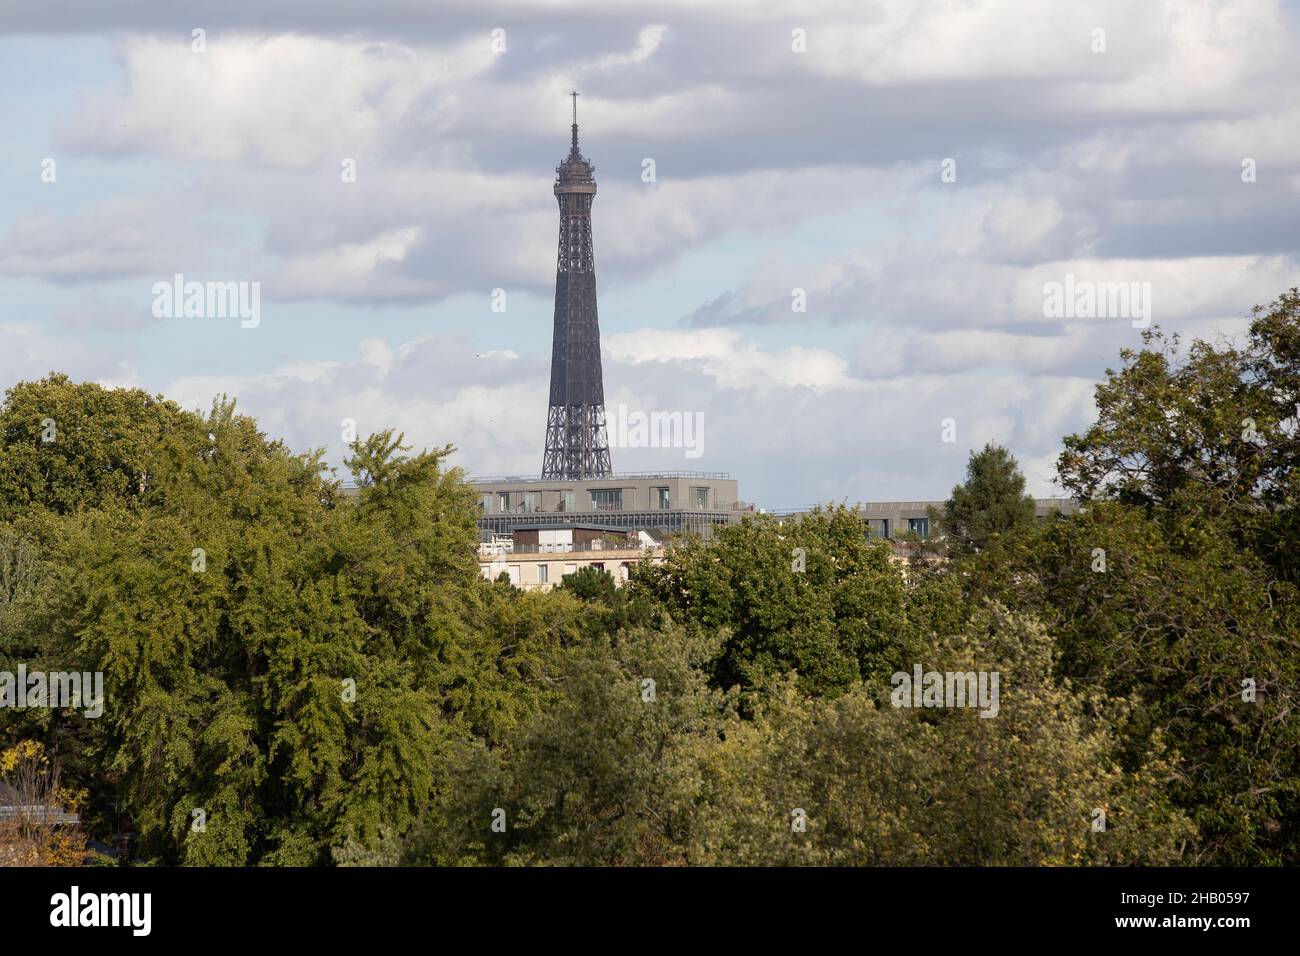 Distant view of the Eiffel Tower, Paris, France. Stock Photo